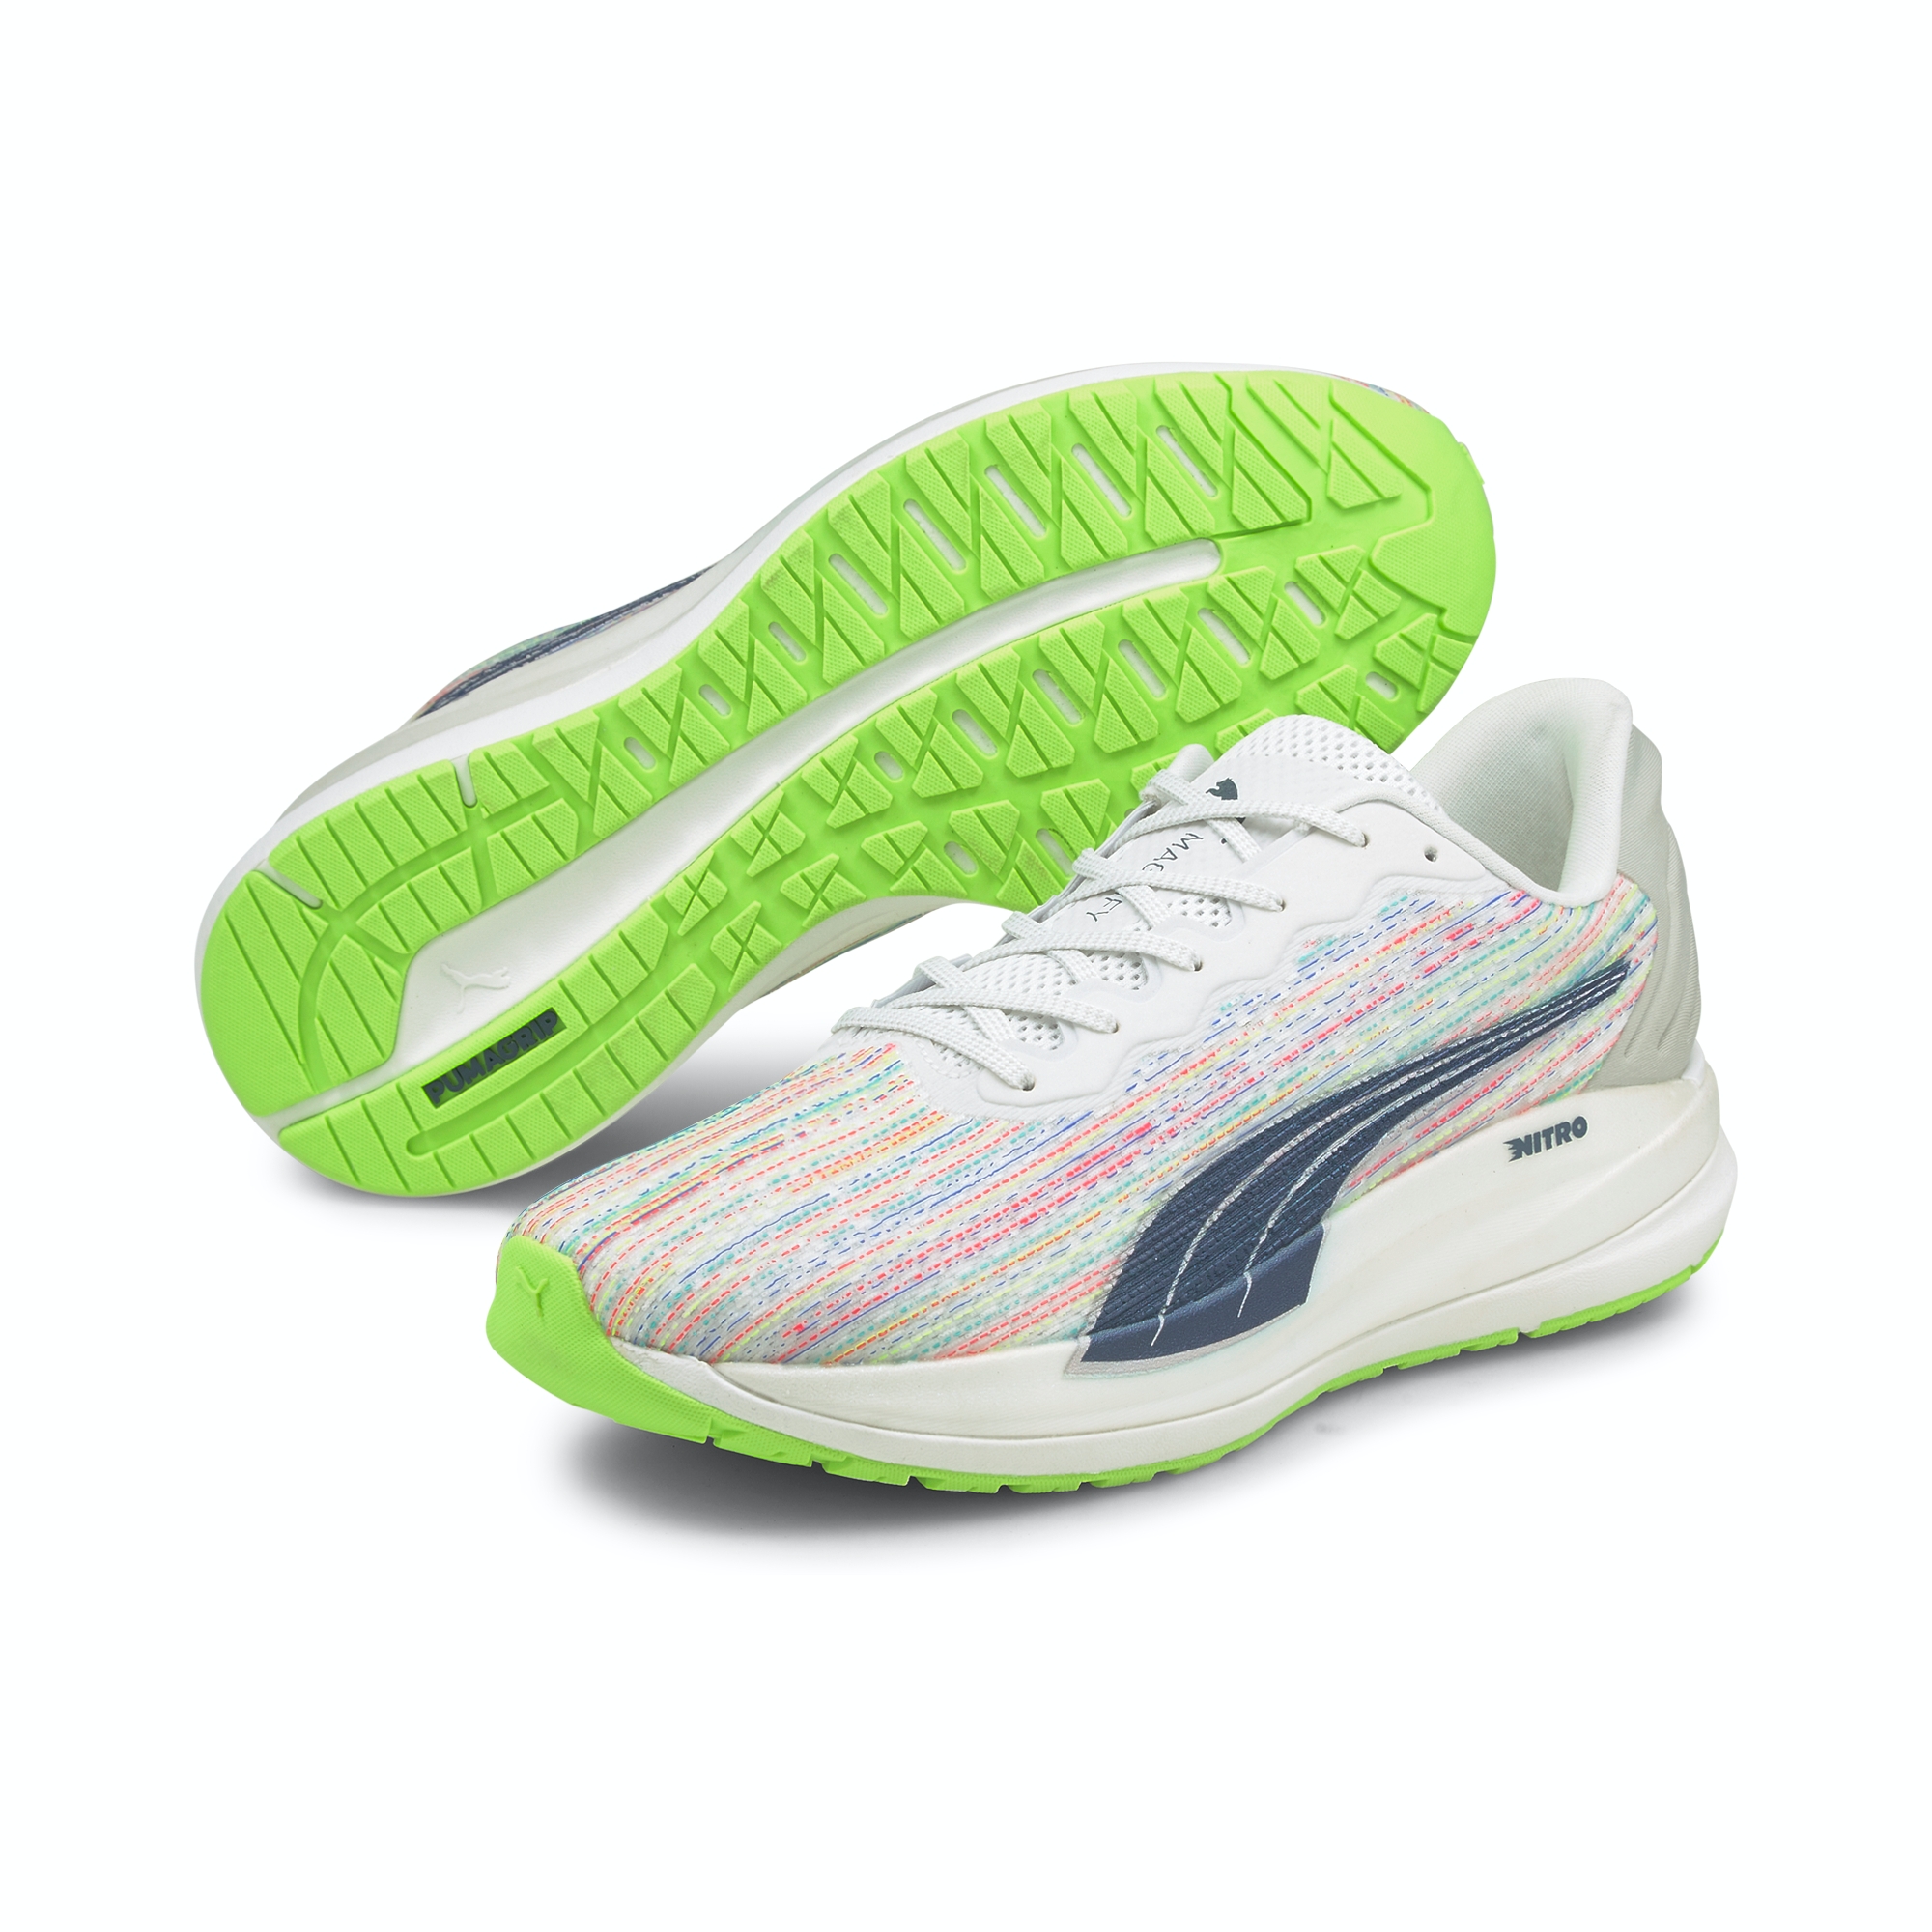 PUMA Magnify Nitro Spectra: Comfort Magnified - Runner's World